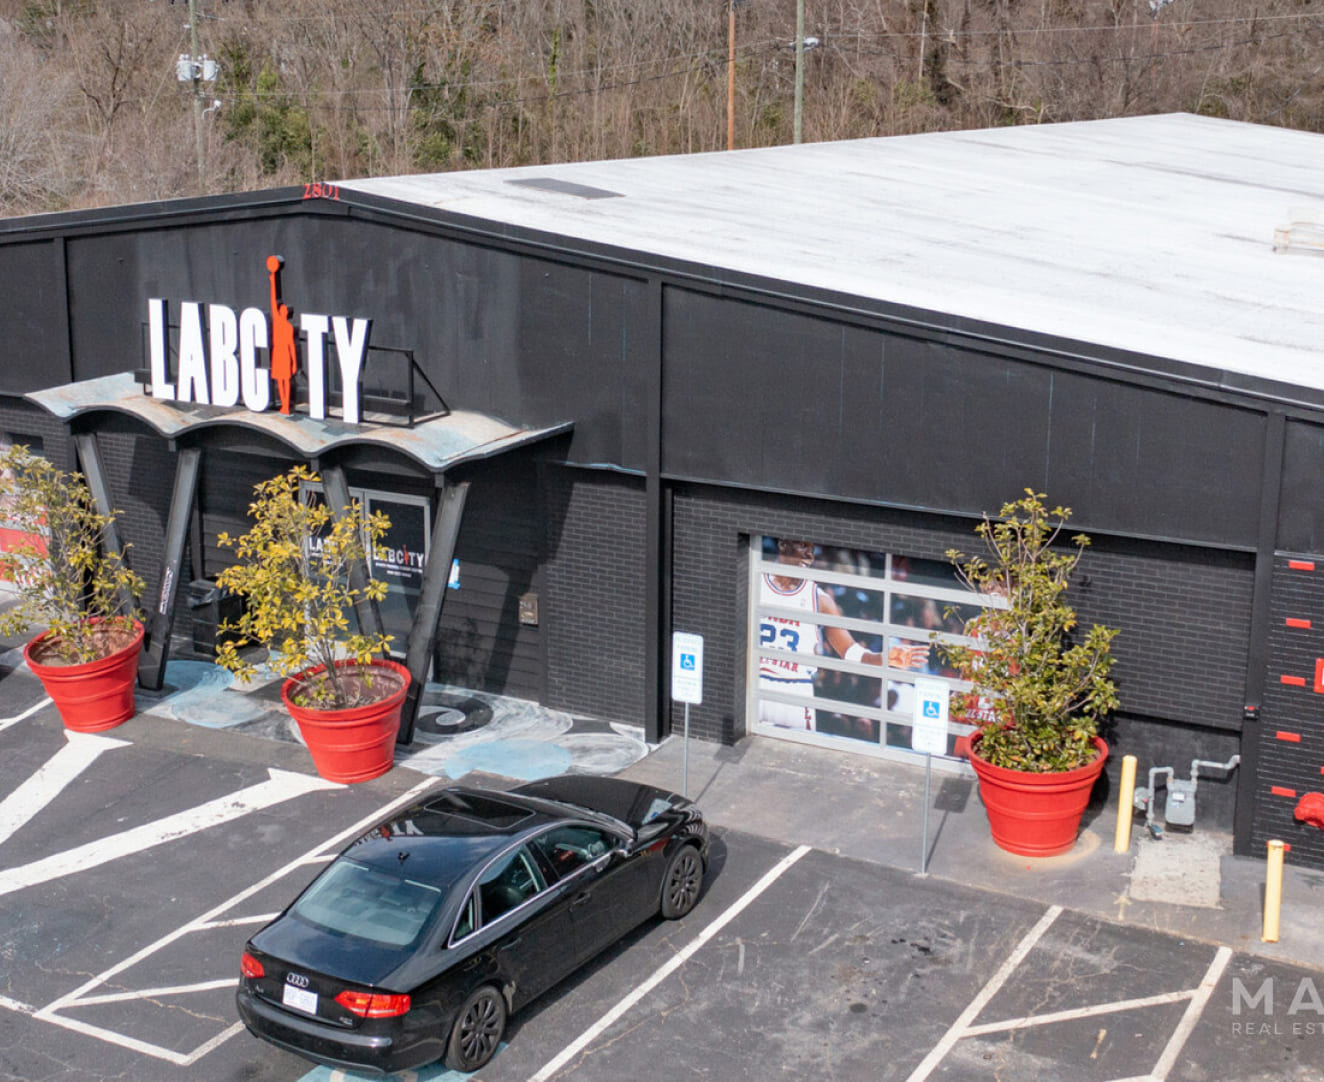 An aerial view of the LabCity at 2801 E. Independence Blvd in Charlotte, NC.